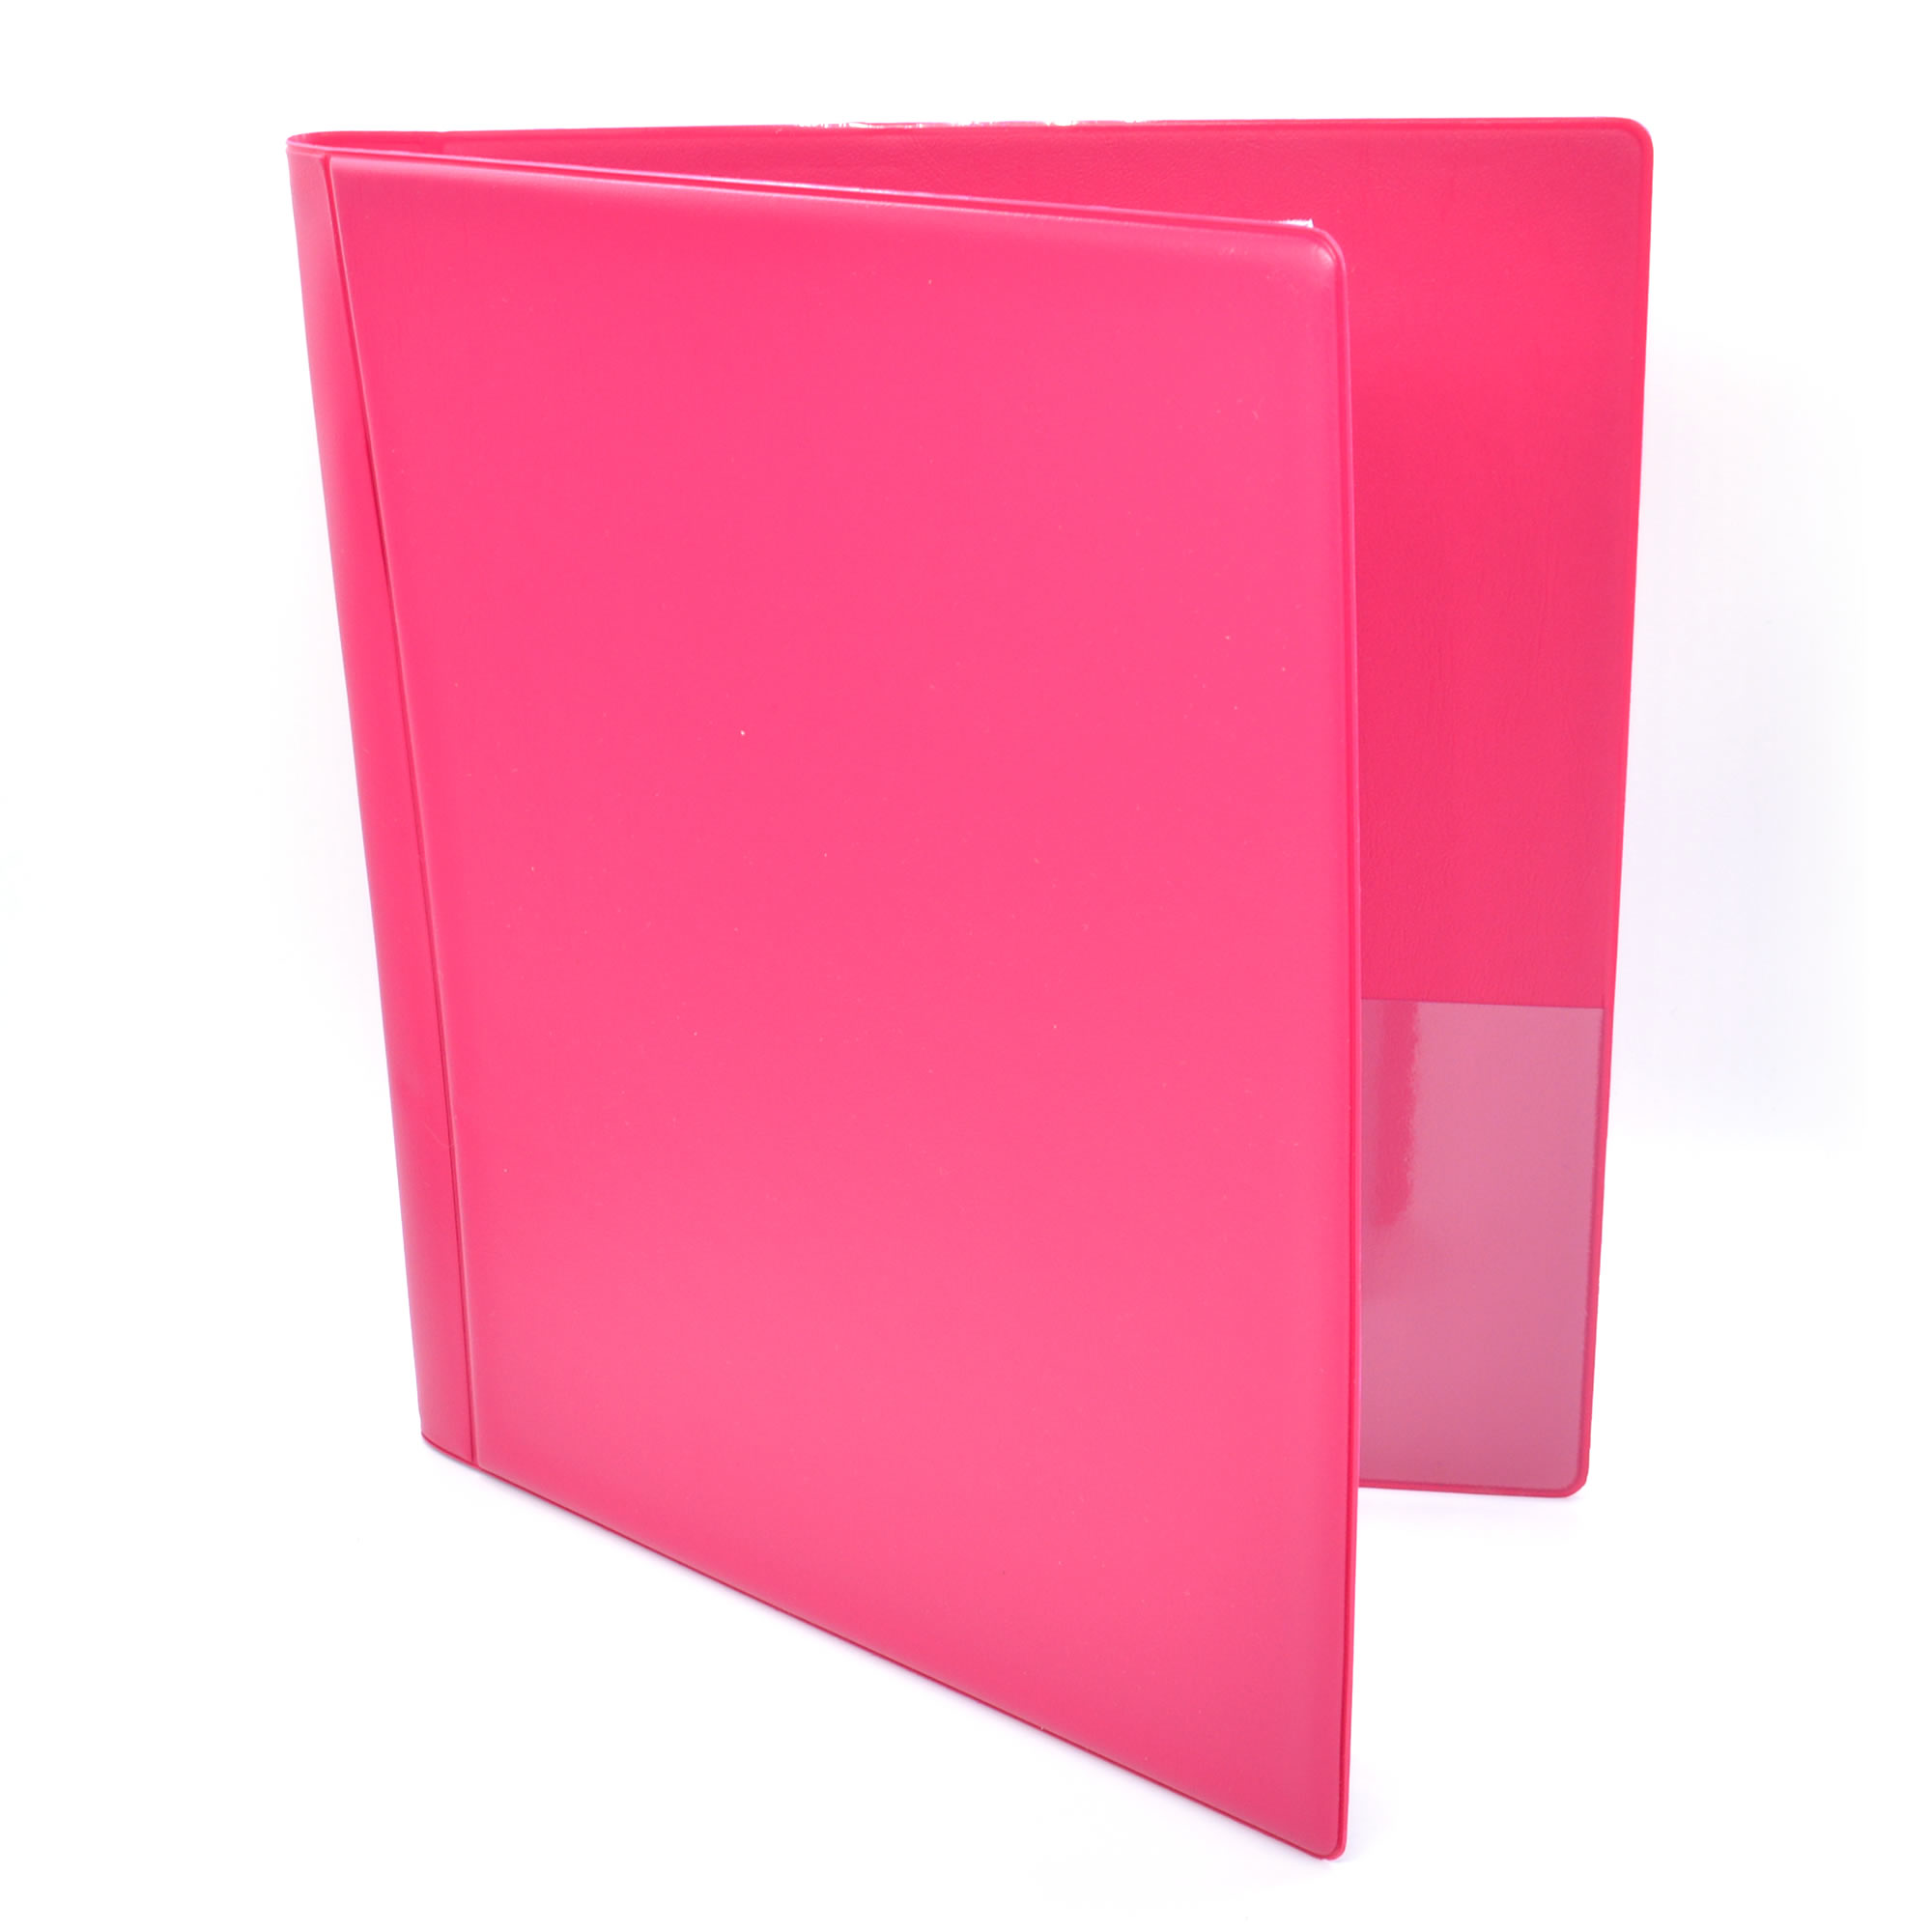 Literature Organiser - Magazine, Tract and Ministry Folder  - Pink